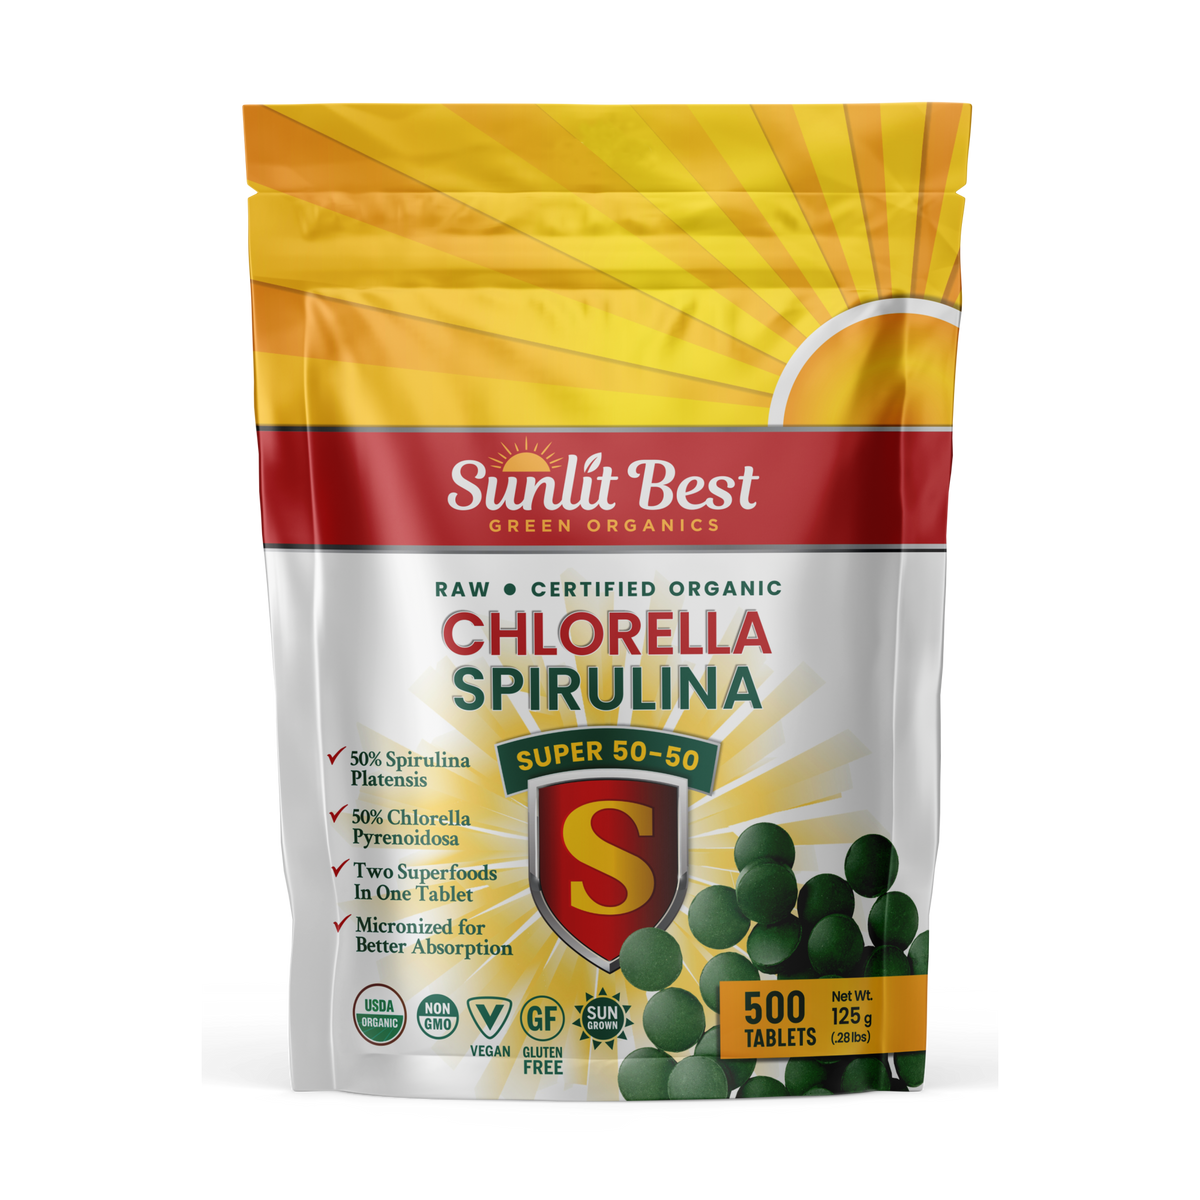 Spirulina Chlorella Cracked Cell Wall Super 50-50 Super-Pack 500 Tablets - Raw Organic Gluten-Free Non-GMO Green Superfood. High Protein, Chlorophyll &amp; nucleic acids. No preservatives, No fillers